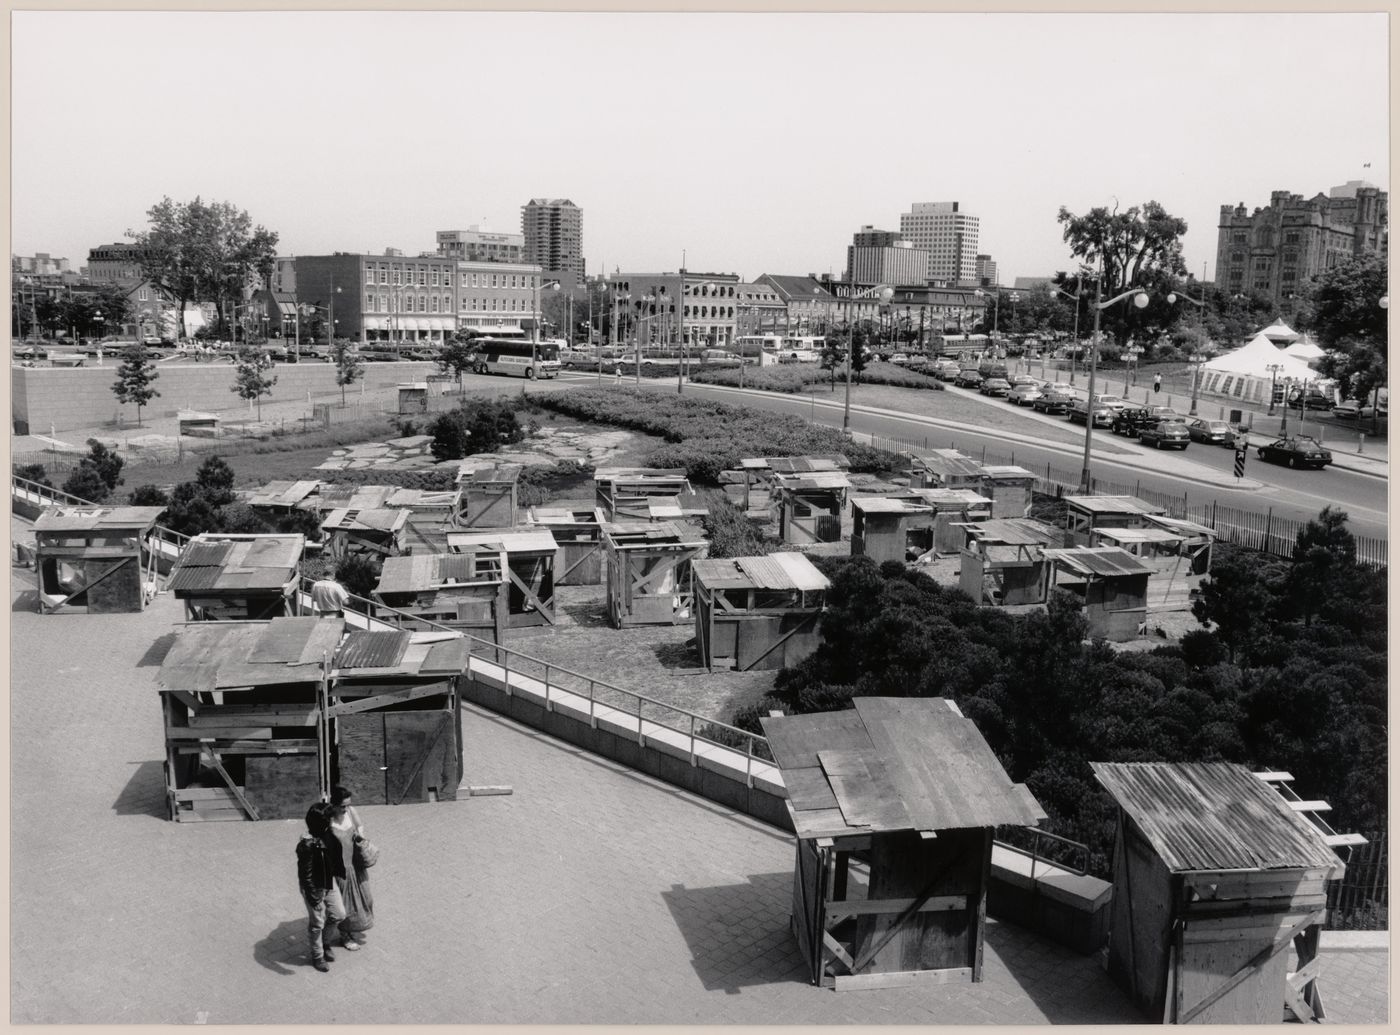 View of the installation "Favela in Ottawa", comprising wooden shack-like structures in the Taiga Garden of the National Gallery of Canada, showing buildings and streets in the background, Ottawa, Ontario